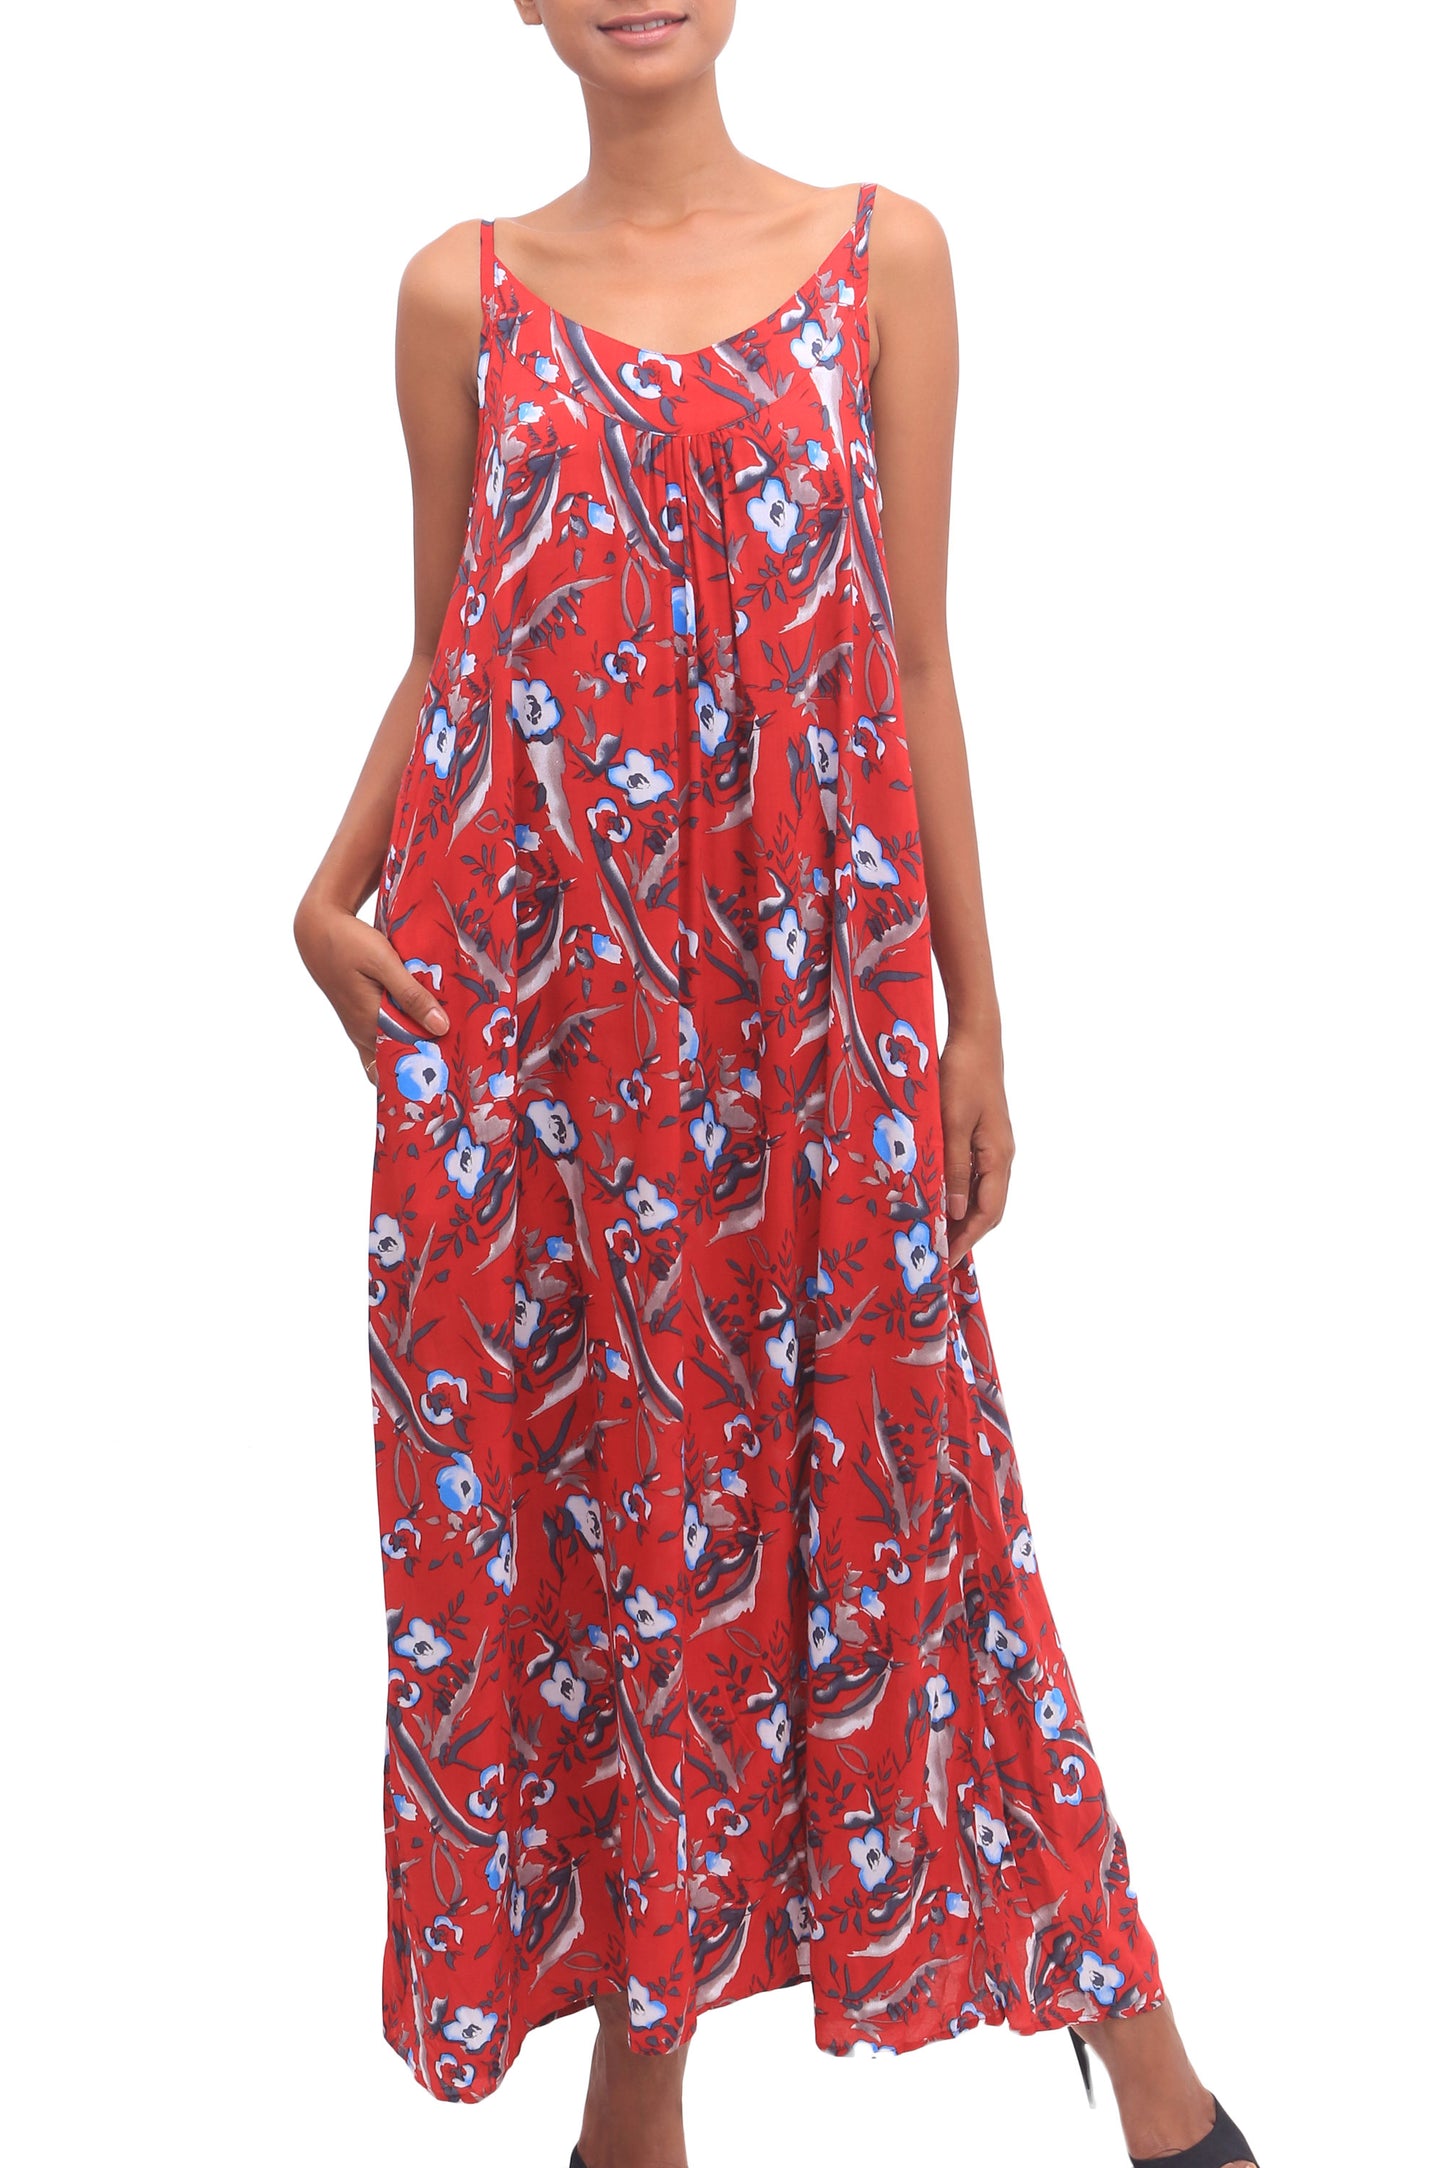 Strawberry Bouquet Floral Rayon Sundress in Strawberry from Bali